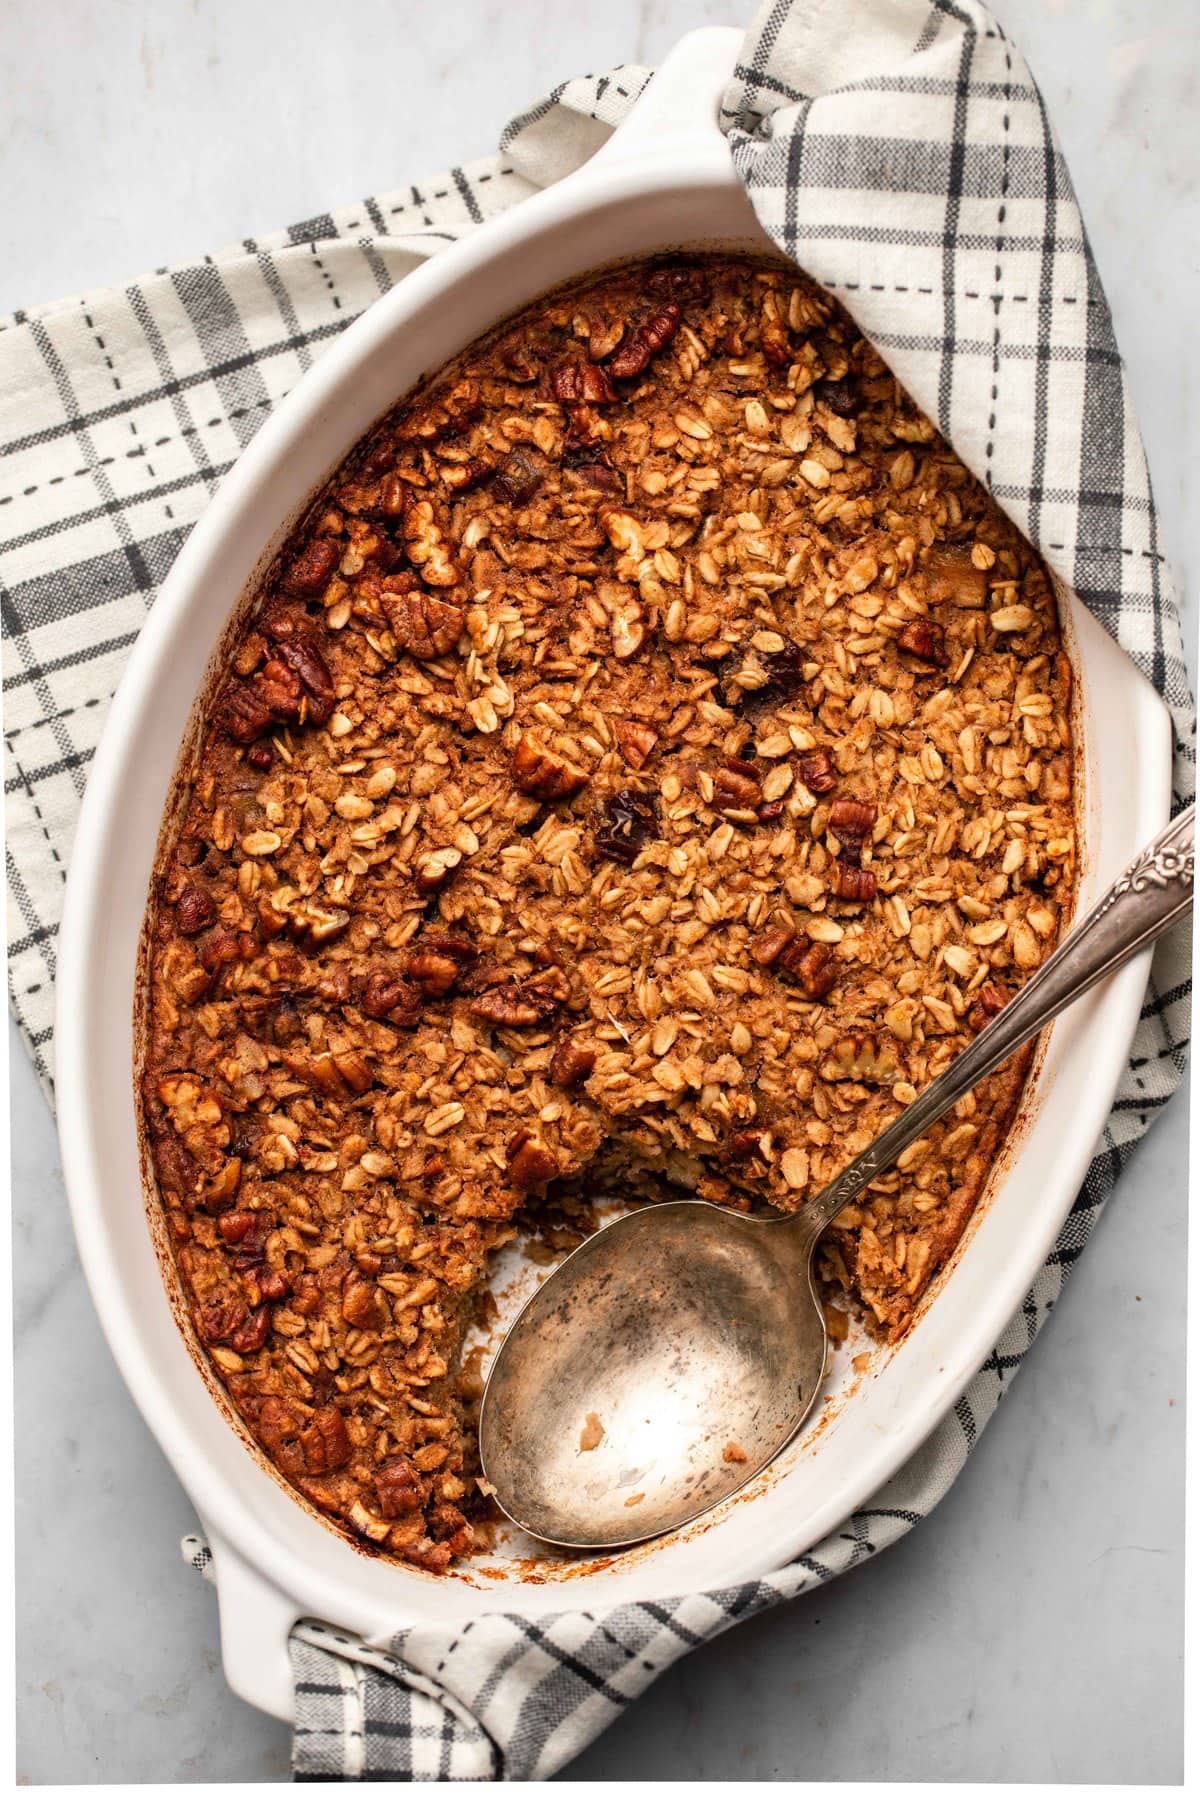 Maple_Pecan_Baked_Oatmeal_Vegan_GlutenFree_FromMyBowl-8 - From My Bowl